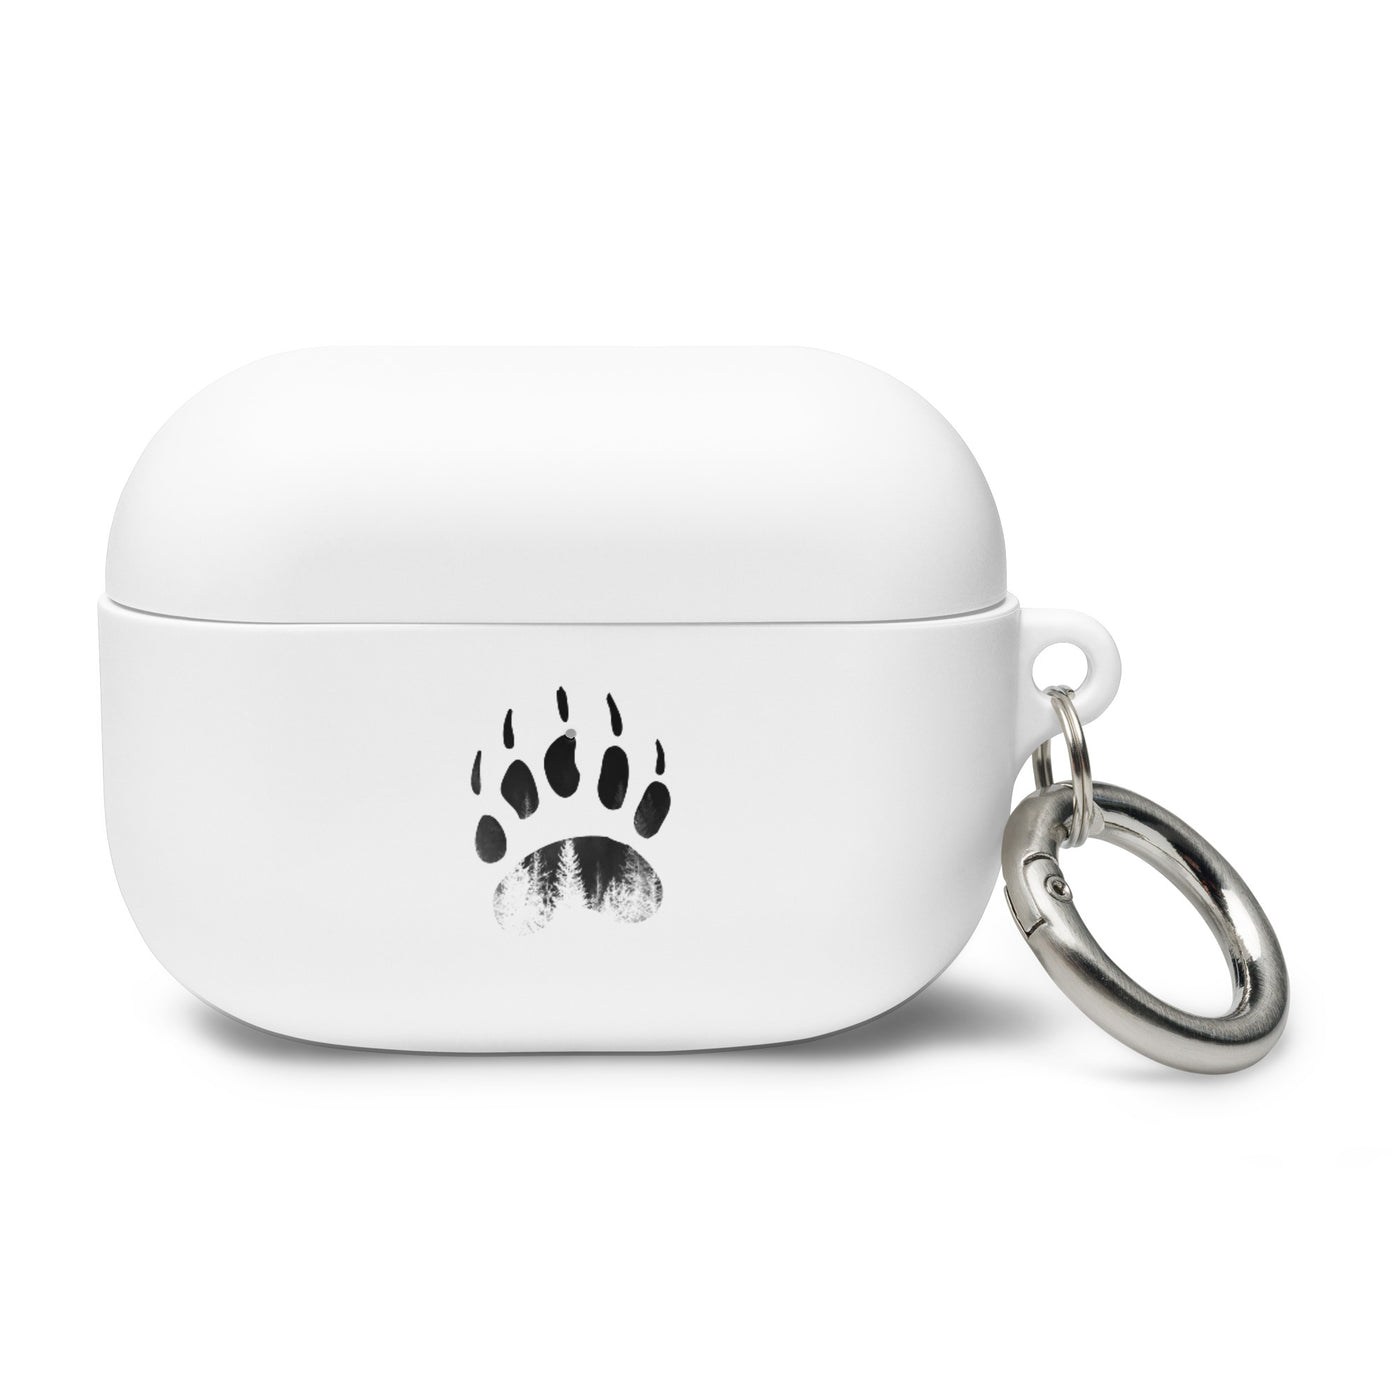 Bär - AirPods Case camping Weiß AirPods Pro